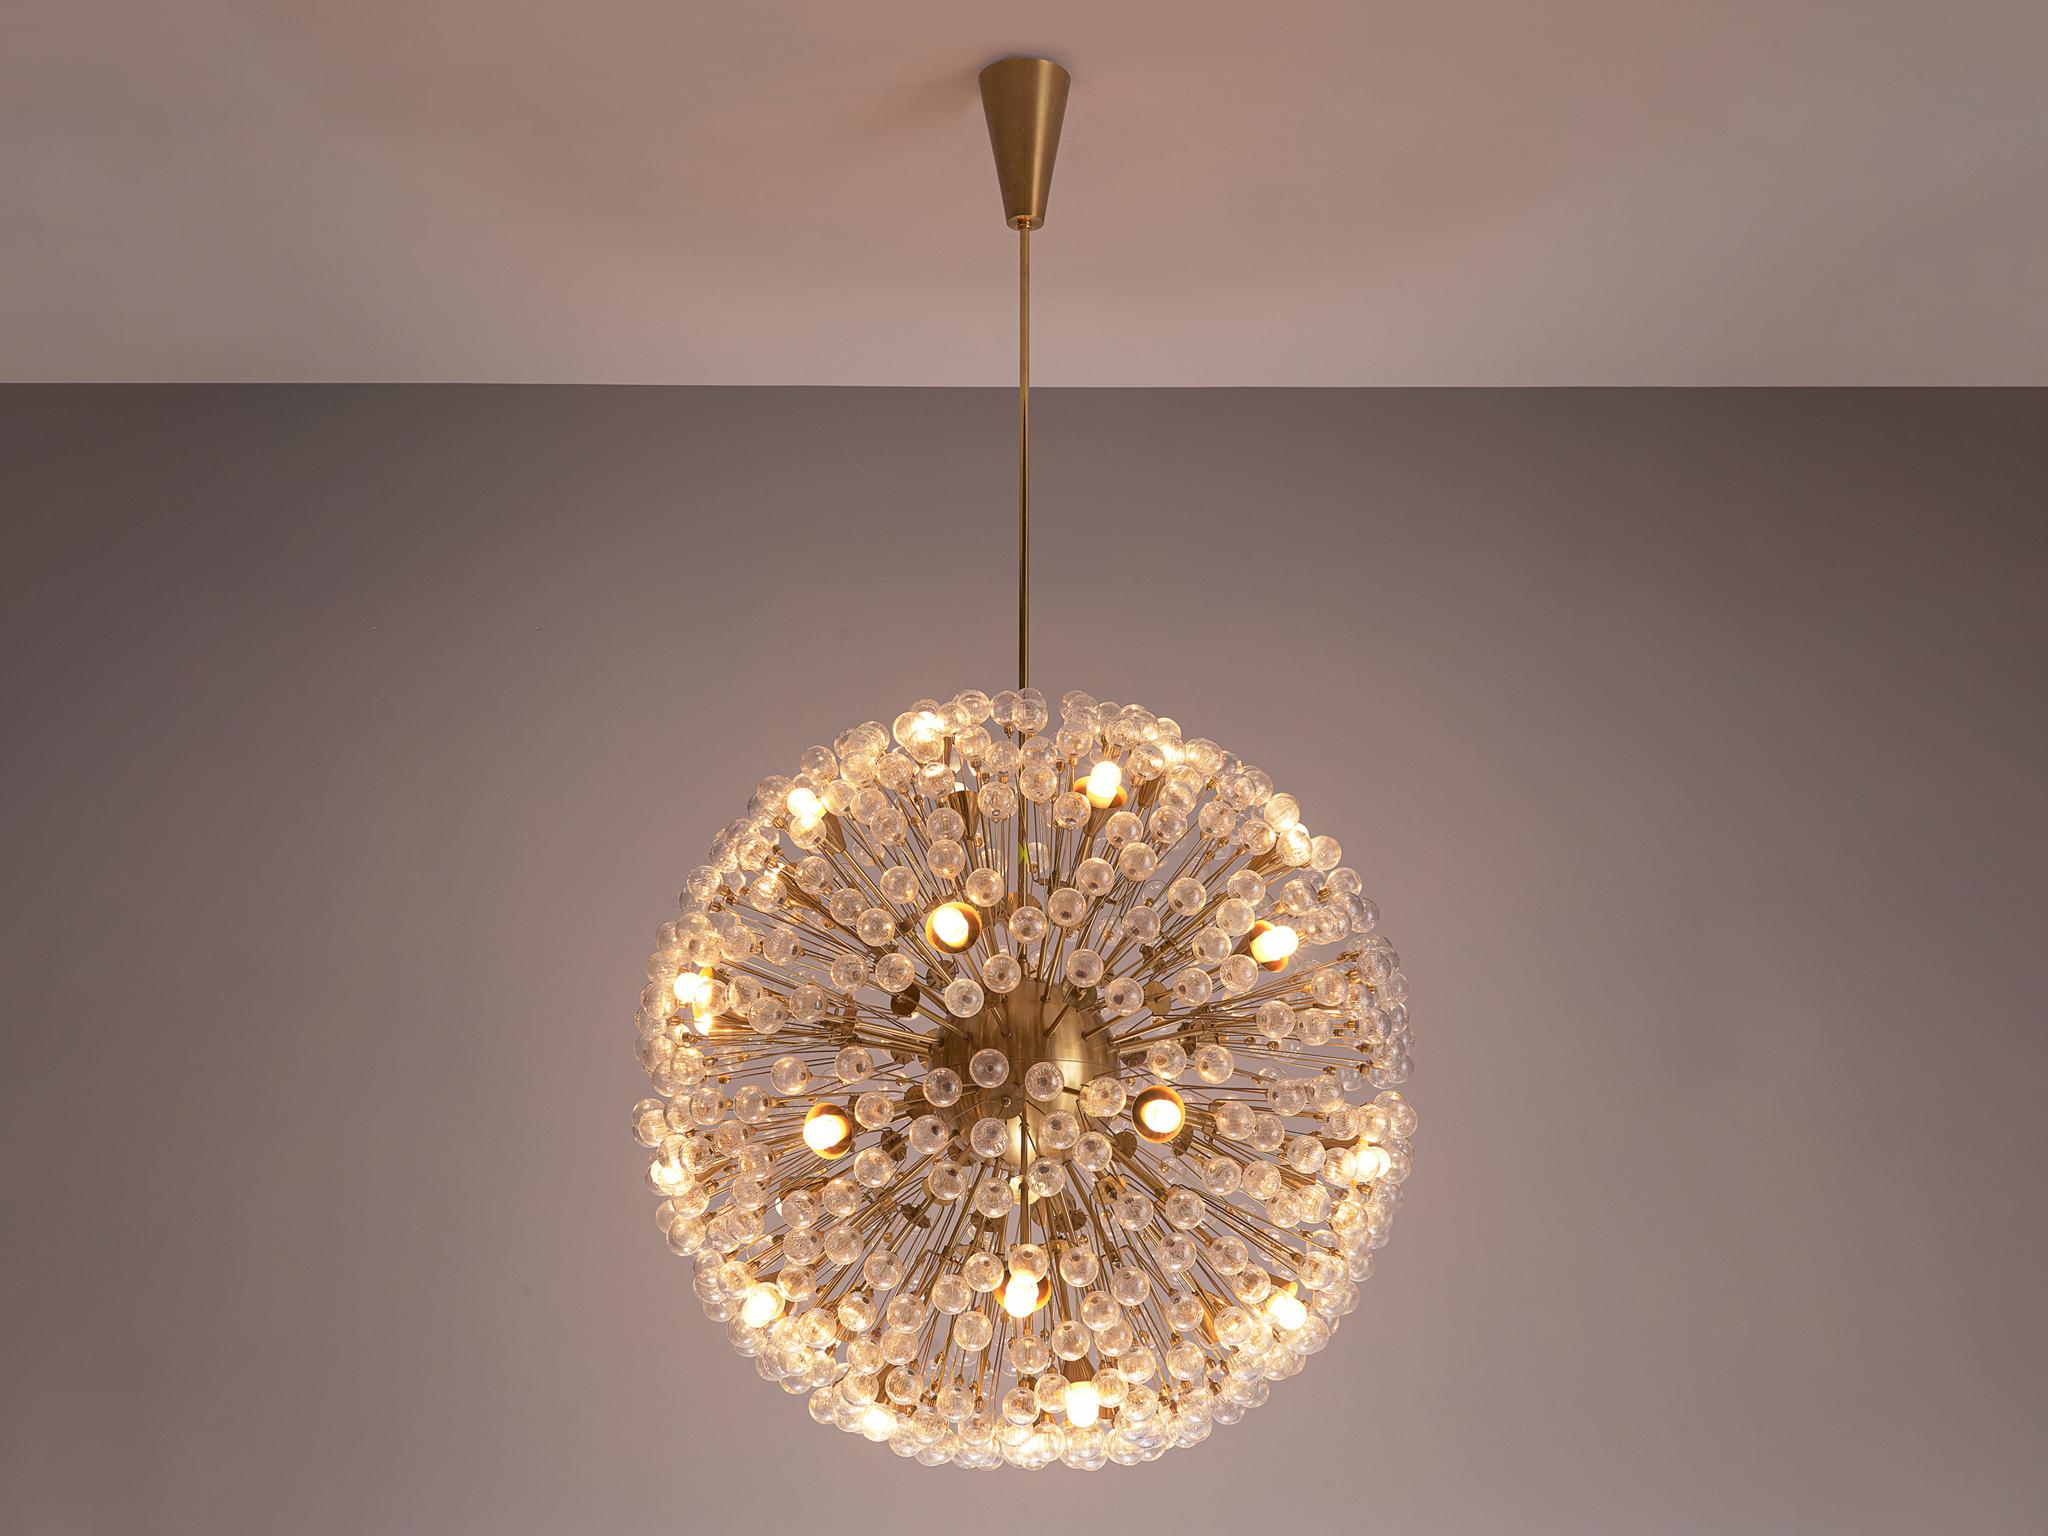 'Sputnik' chandeliers, brass and glass, Austria, 1960s

Round like a ball this 'Sputnik' chandelier consists out of a center sphere from which many rods with glass spheres at their ends are held. The small spheres are made out of structured glass